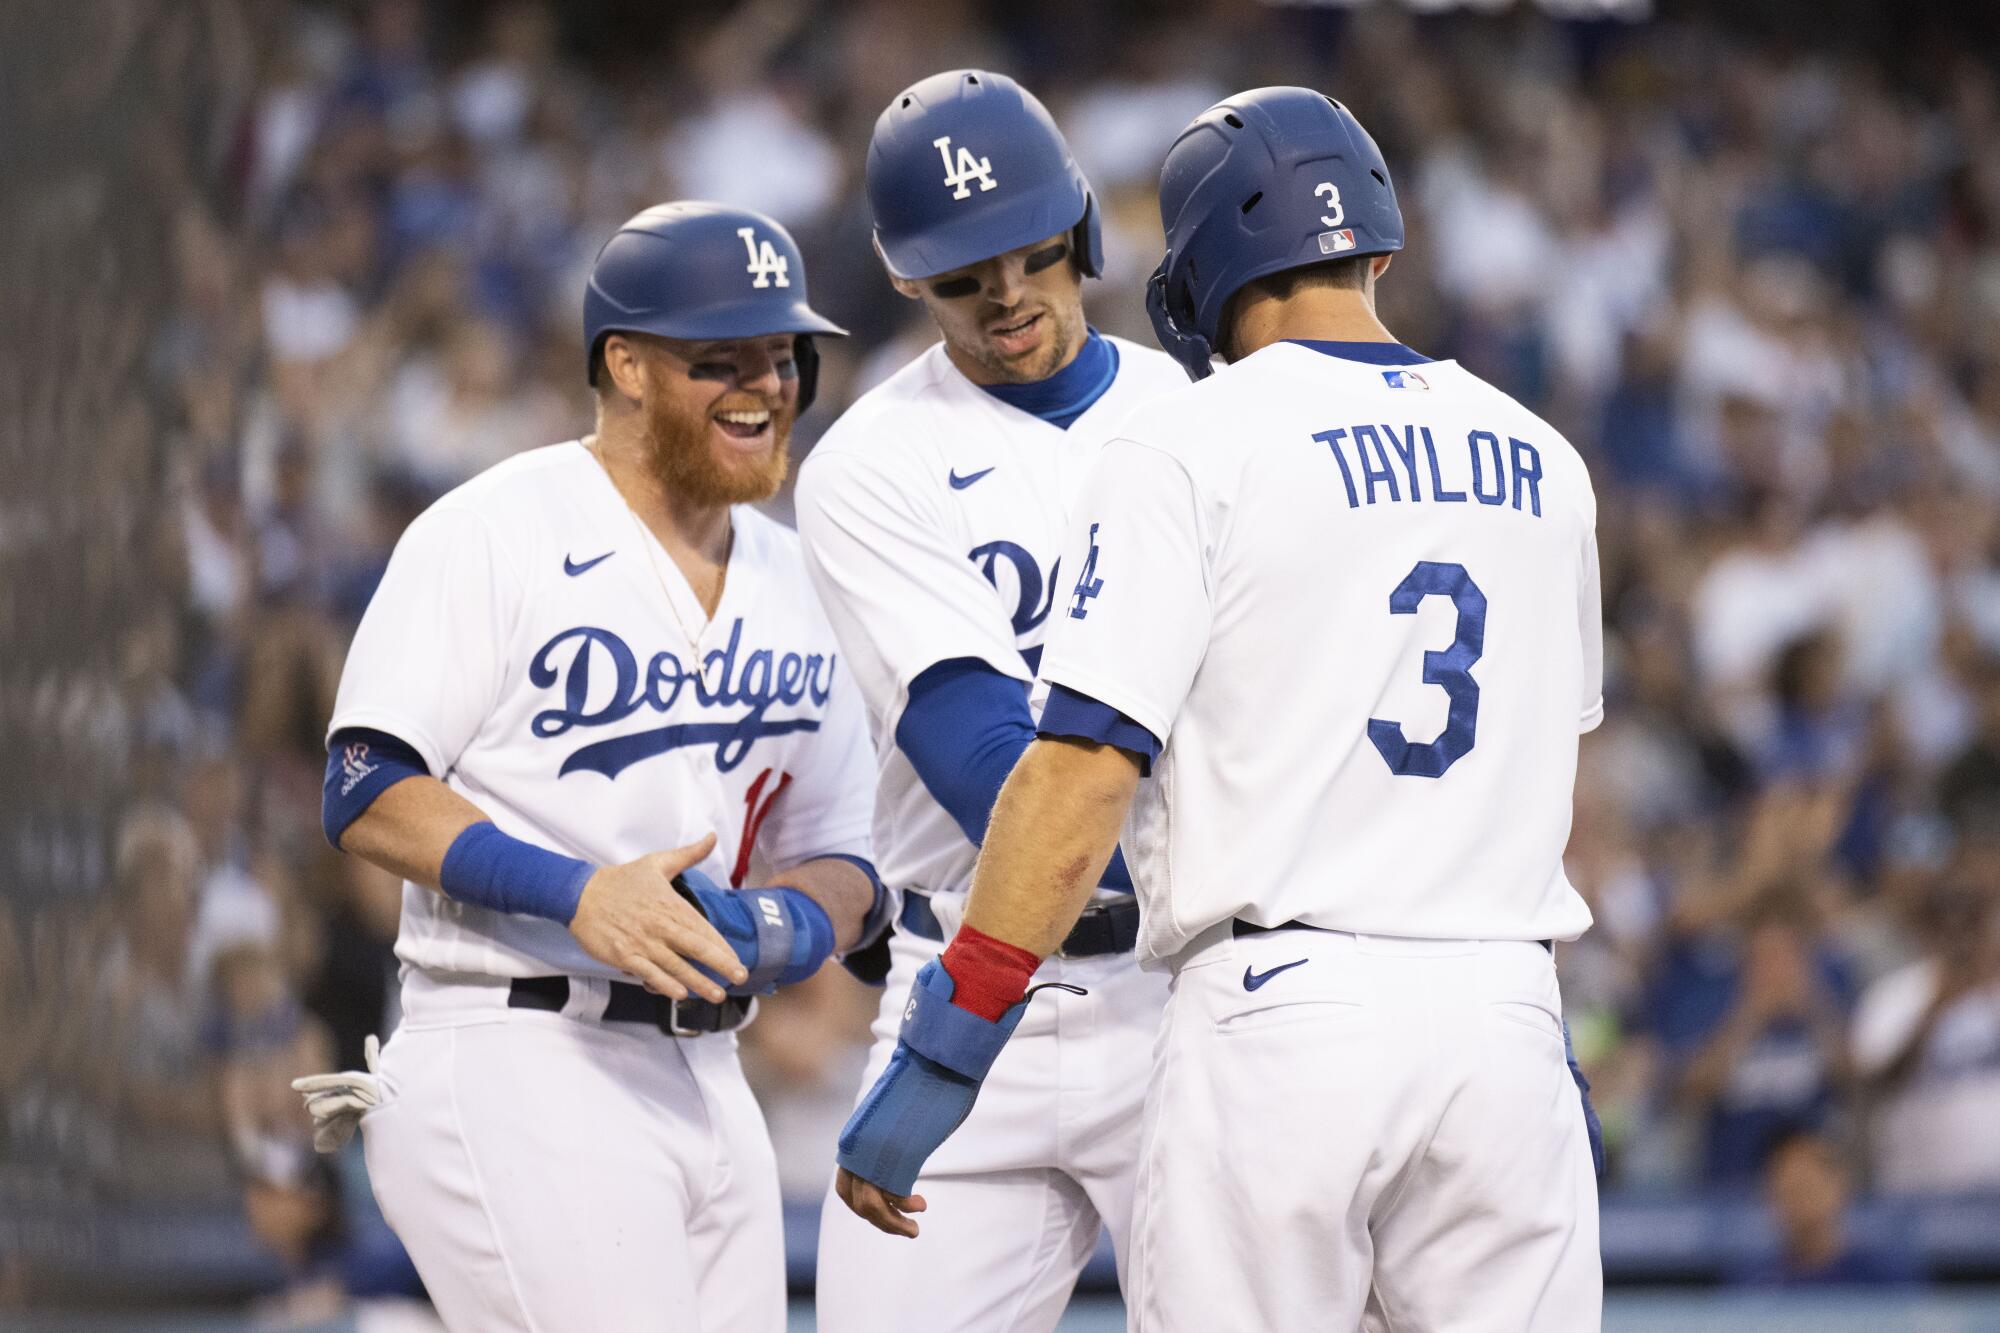 Dodgers Justin Turner, Trayce Thompson and Chris Taylor celebrate Thompson's three-run home run against the Rockies